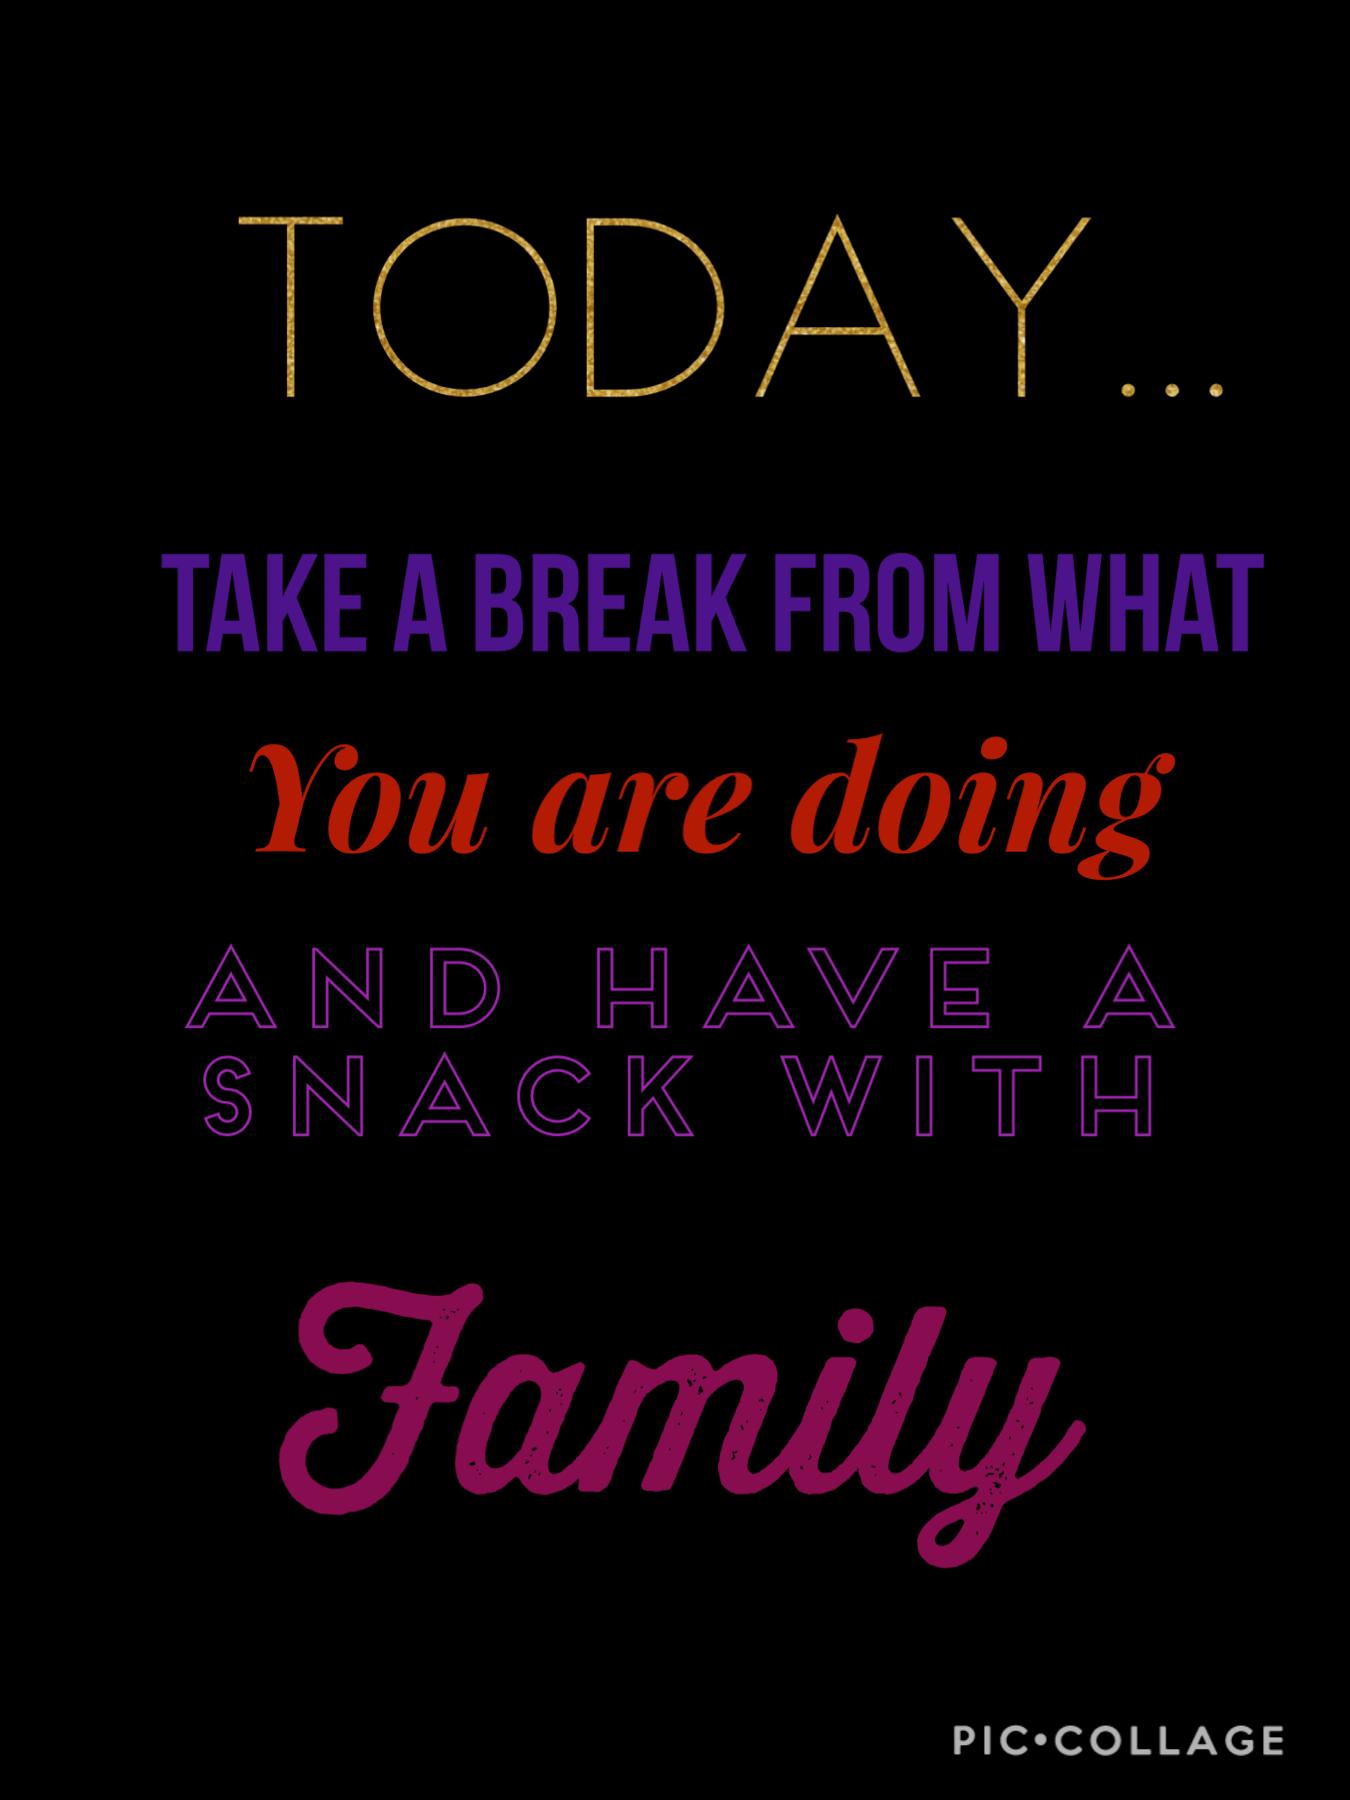 Tap!
Take a break and have a snack!
#We'llGetThruThis
#Together,WeGotThis